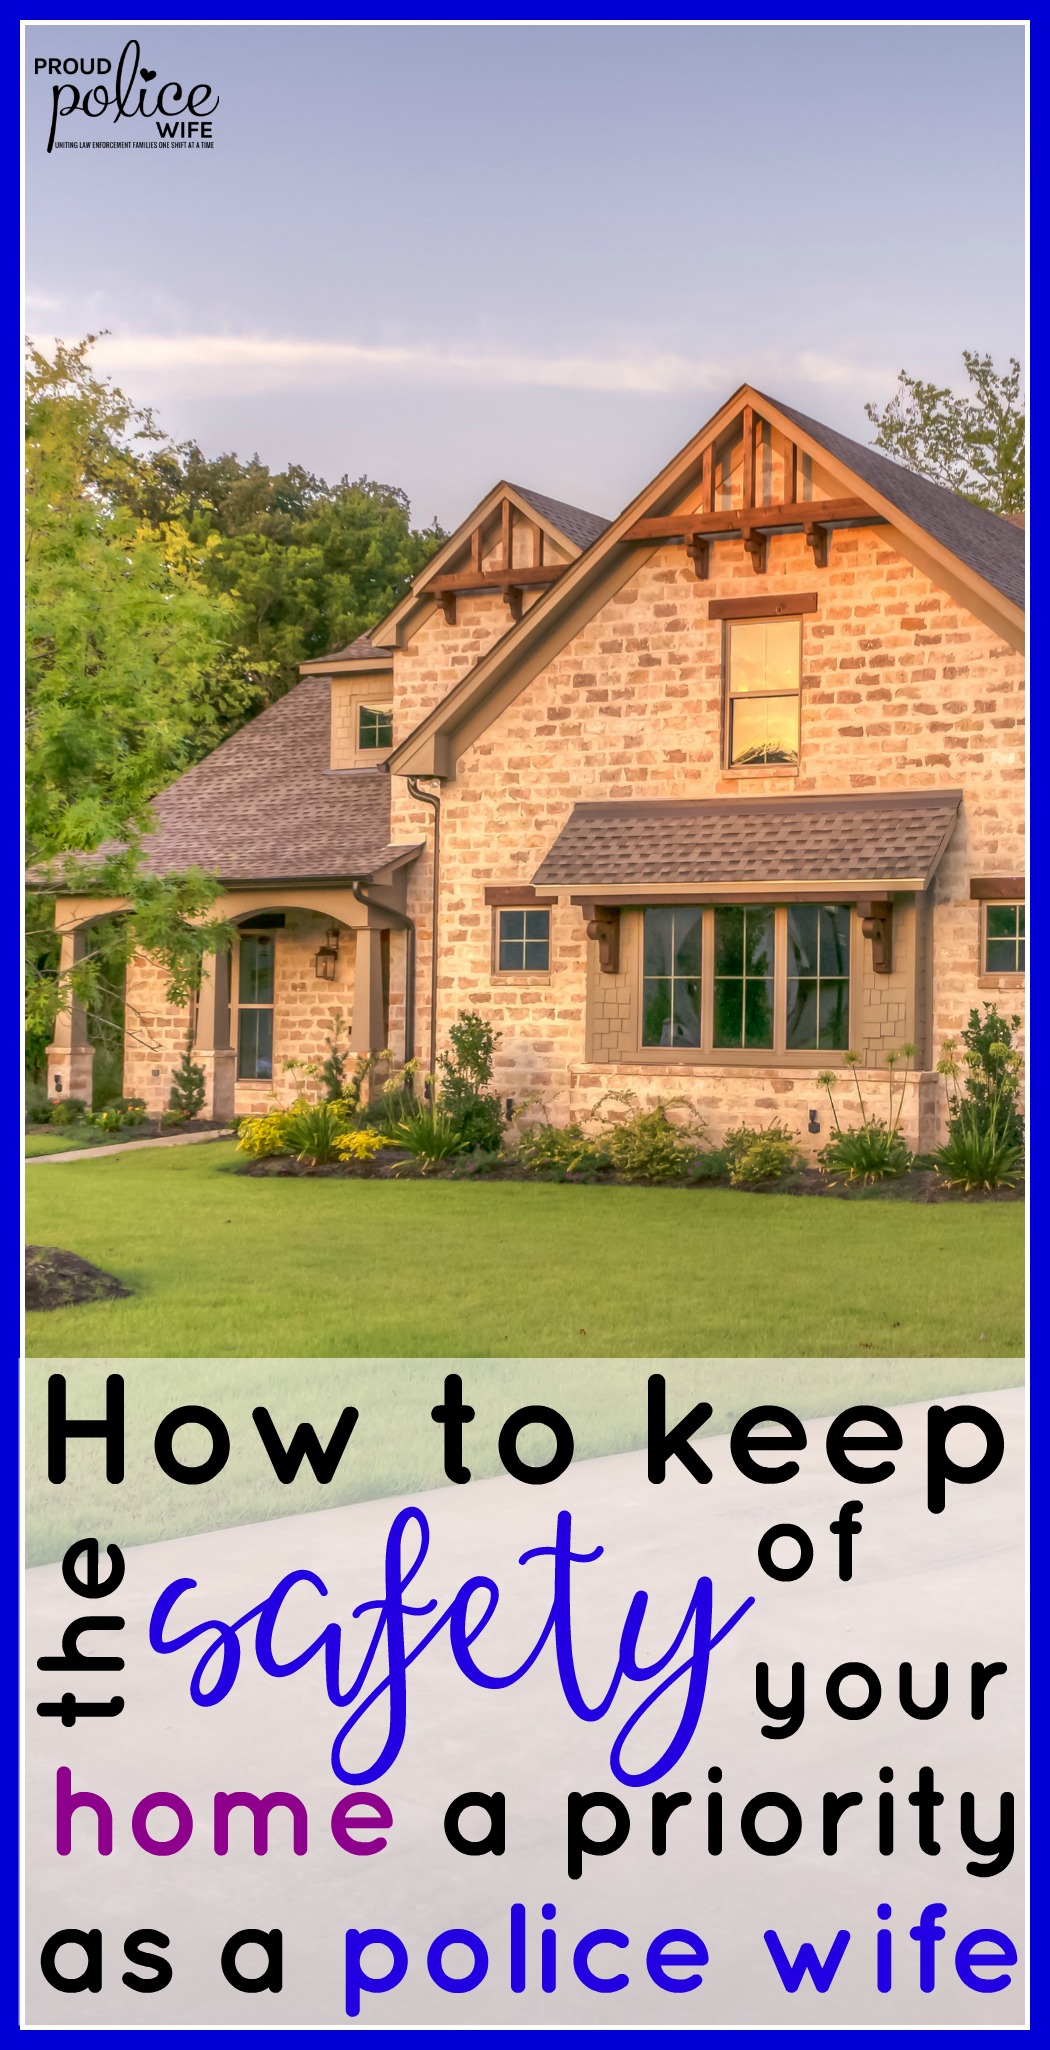 How to keep safety of your home a priority as a police wife